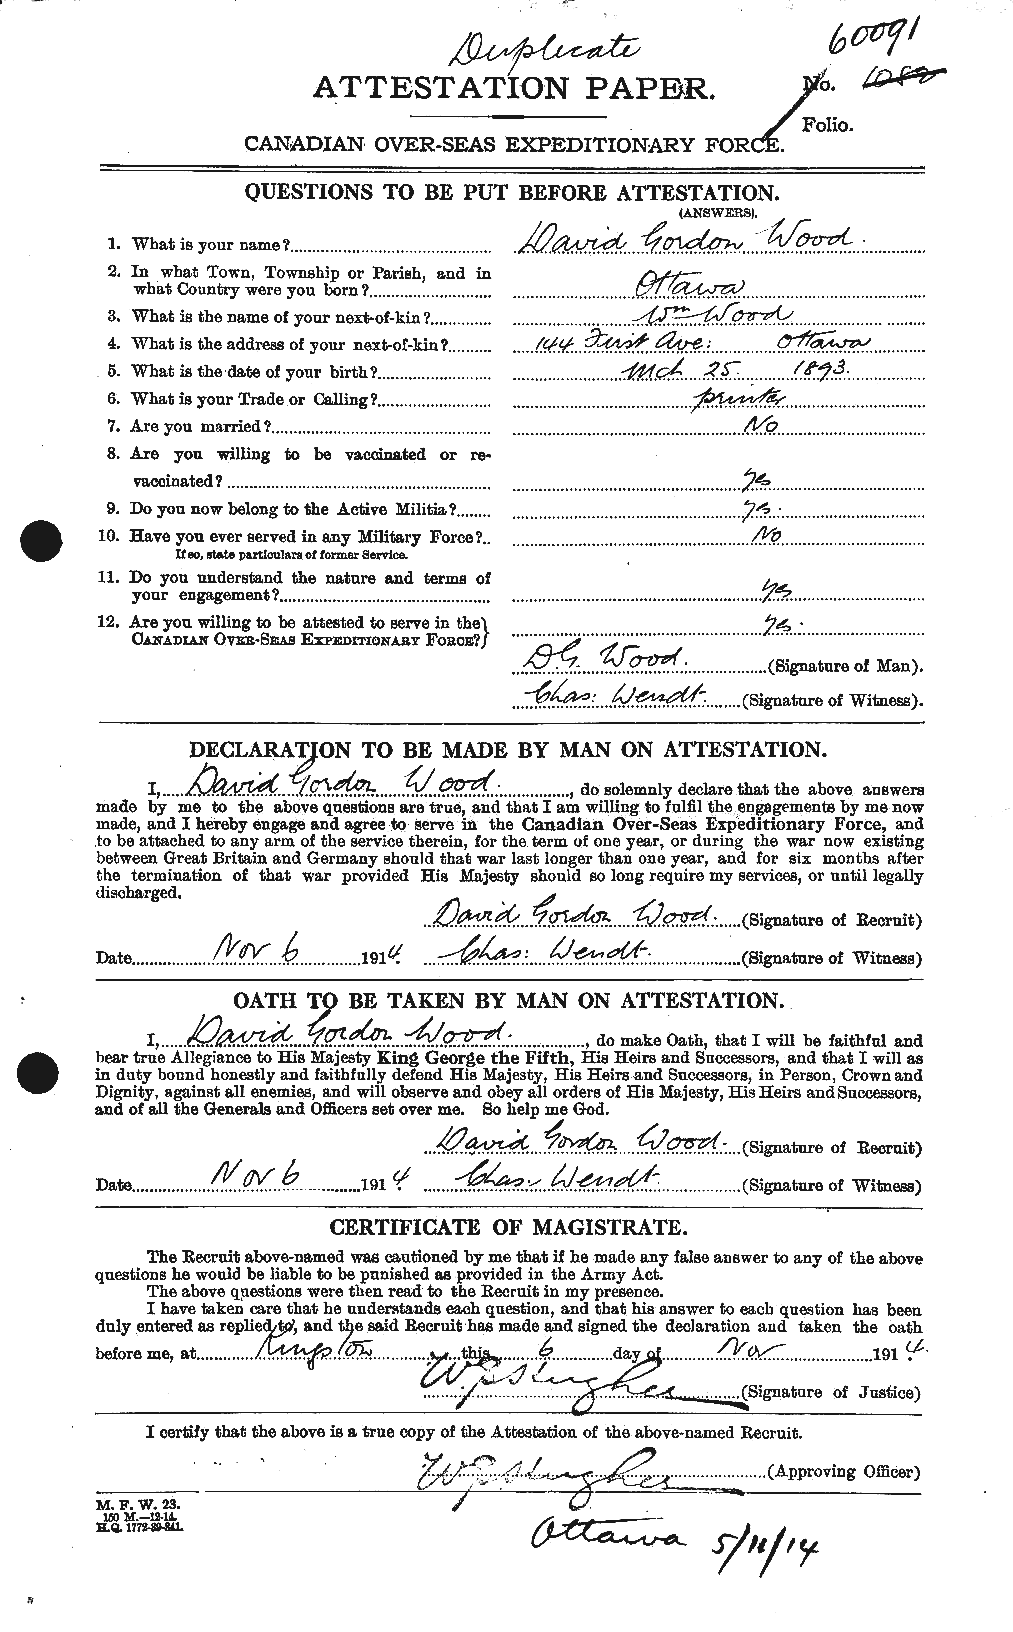 Personnel Records of the First World War - CEF 682957a